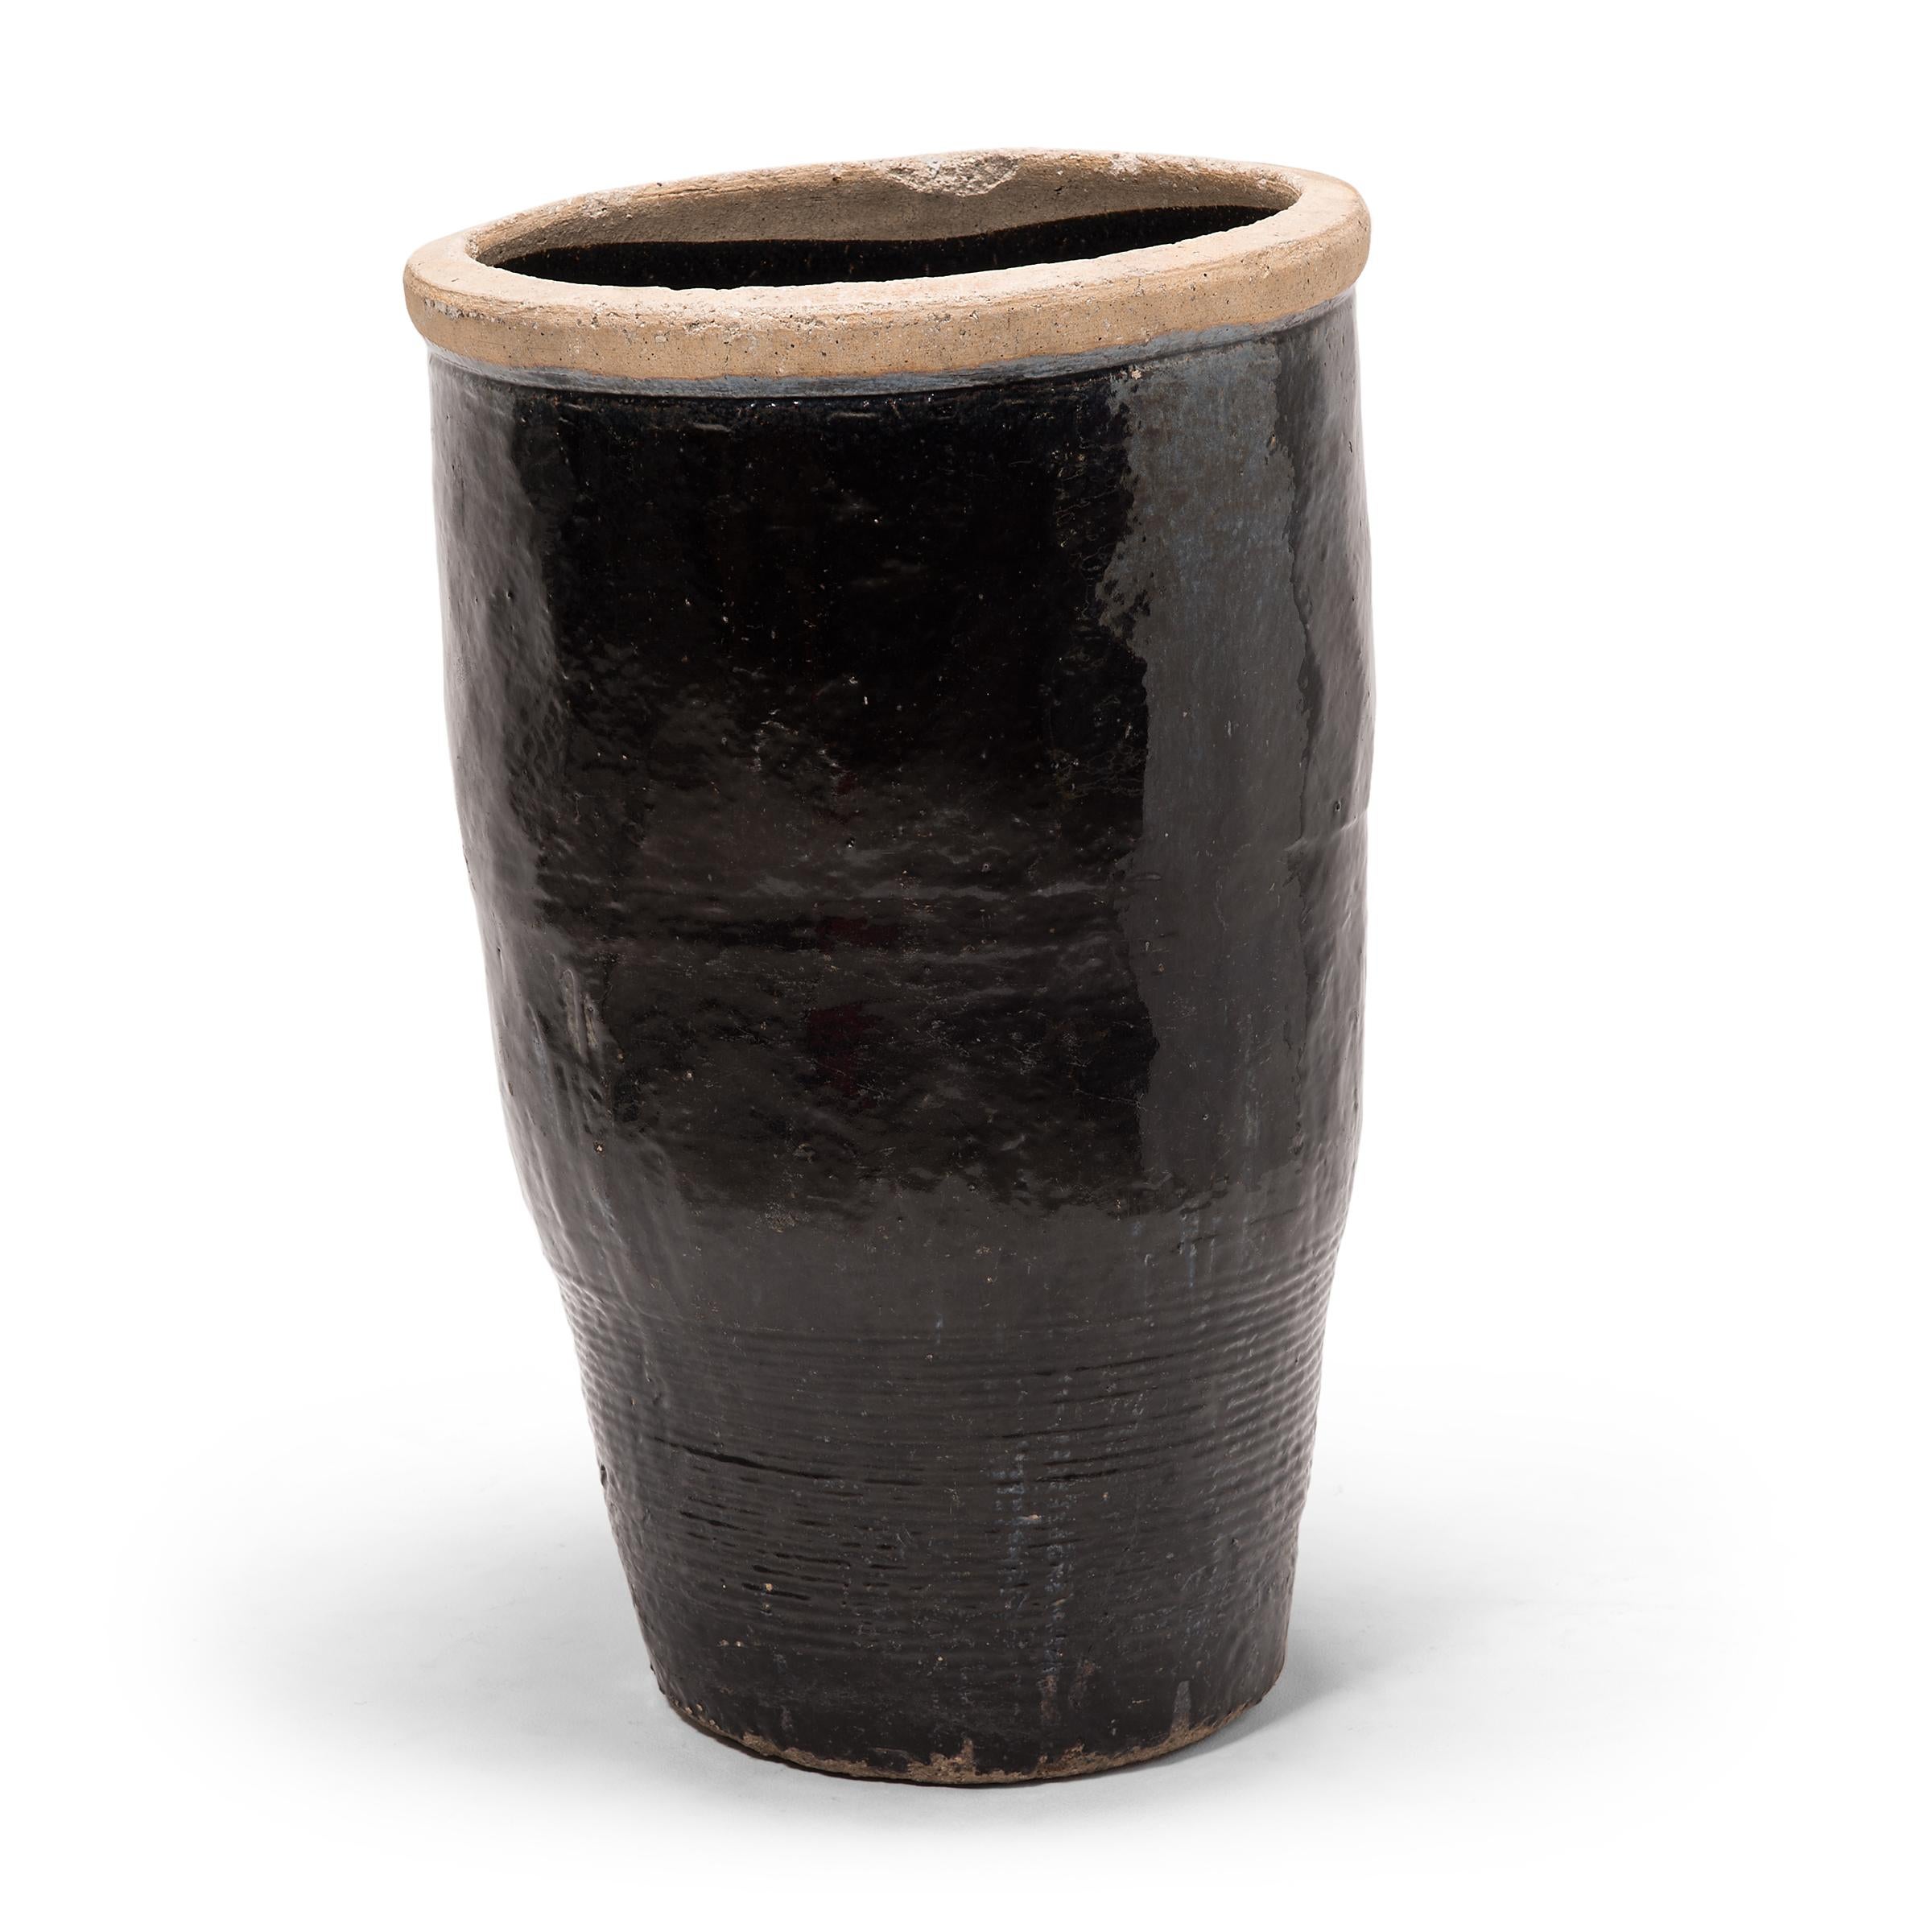 Originally used for pickling foods, this monumental early 20th century vessel is coated inside and out with a dark glaze. Subtle ridges at the base suggest that the jar was fashioned by coiling flattened ropes of clay into the desired shape.